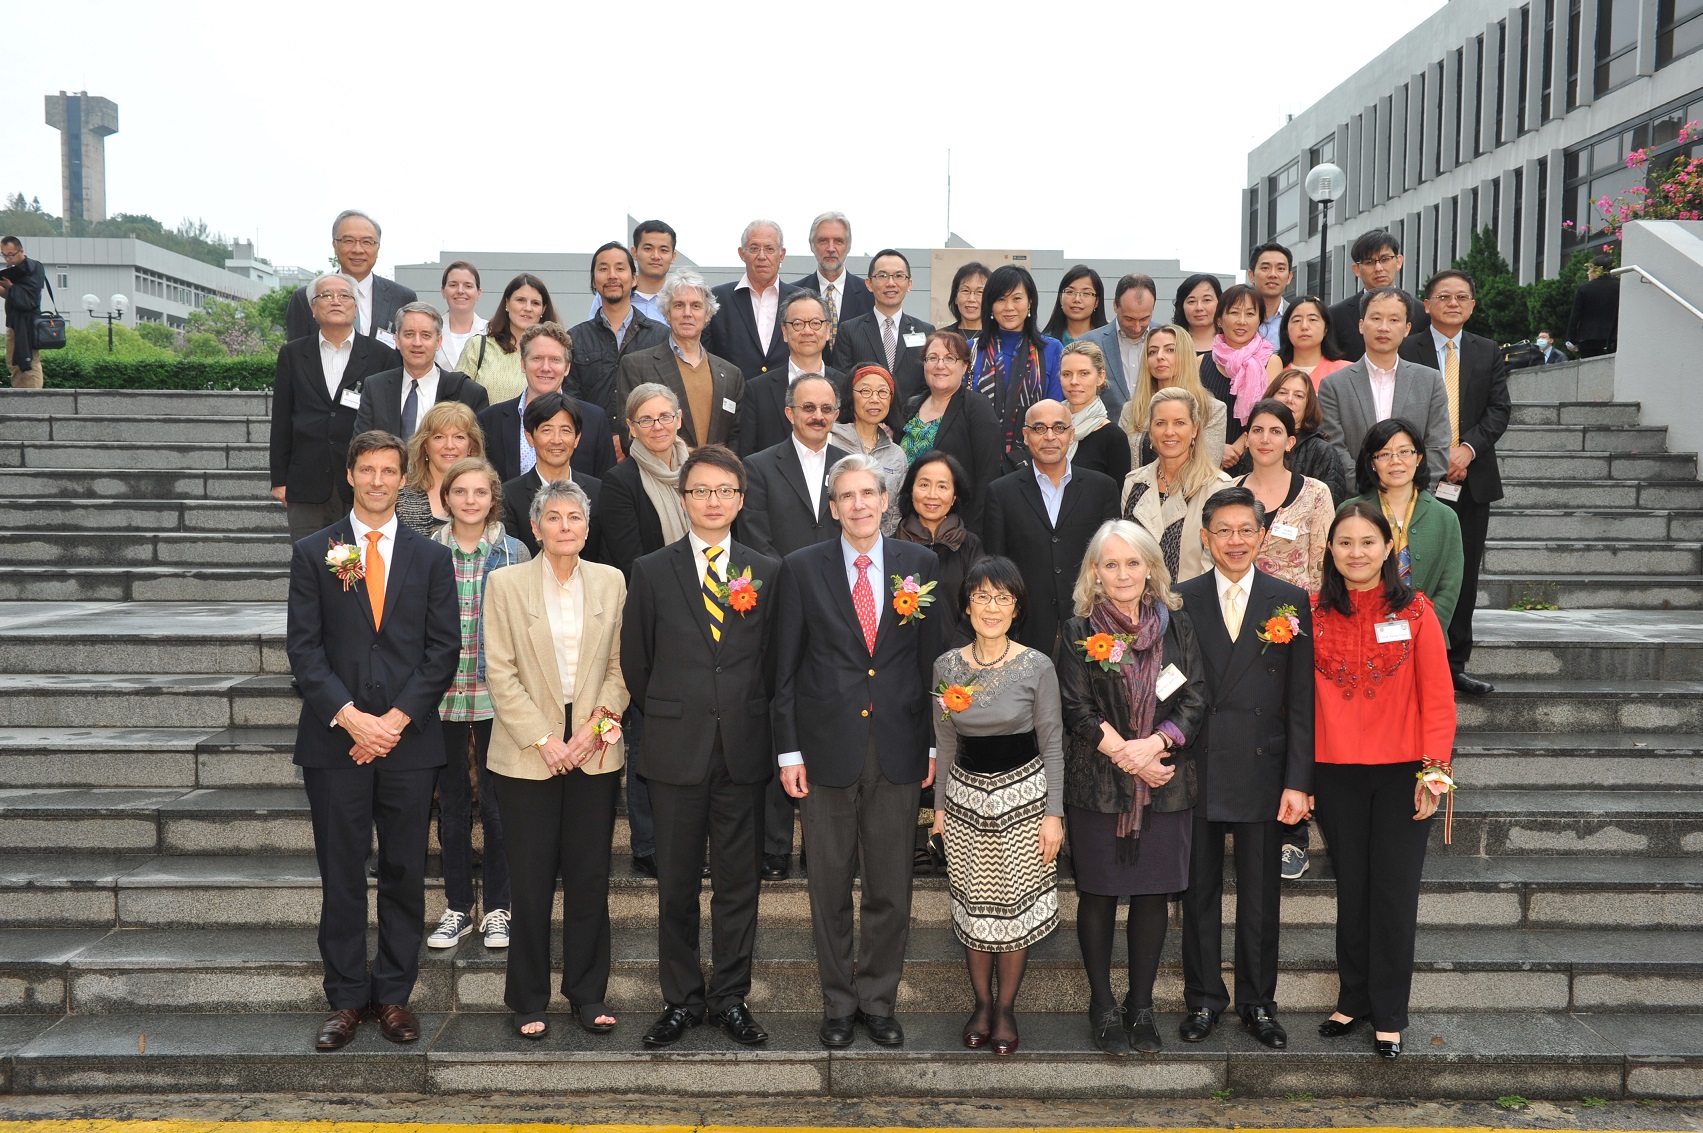 A group photo between CUHK faculties and Harvard delegates.